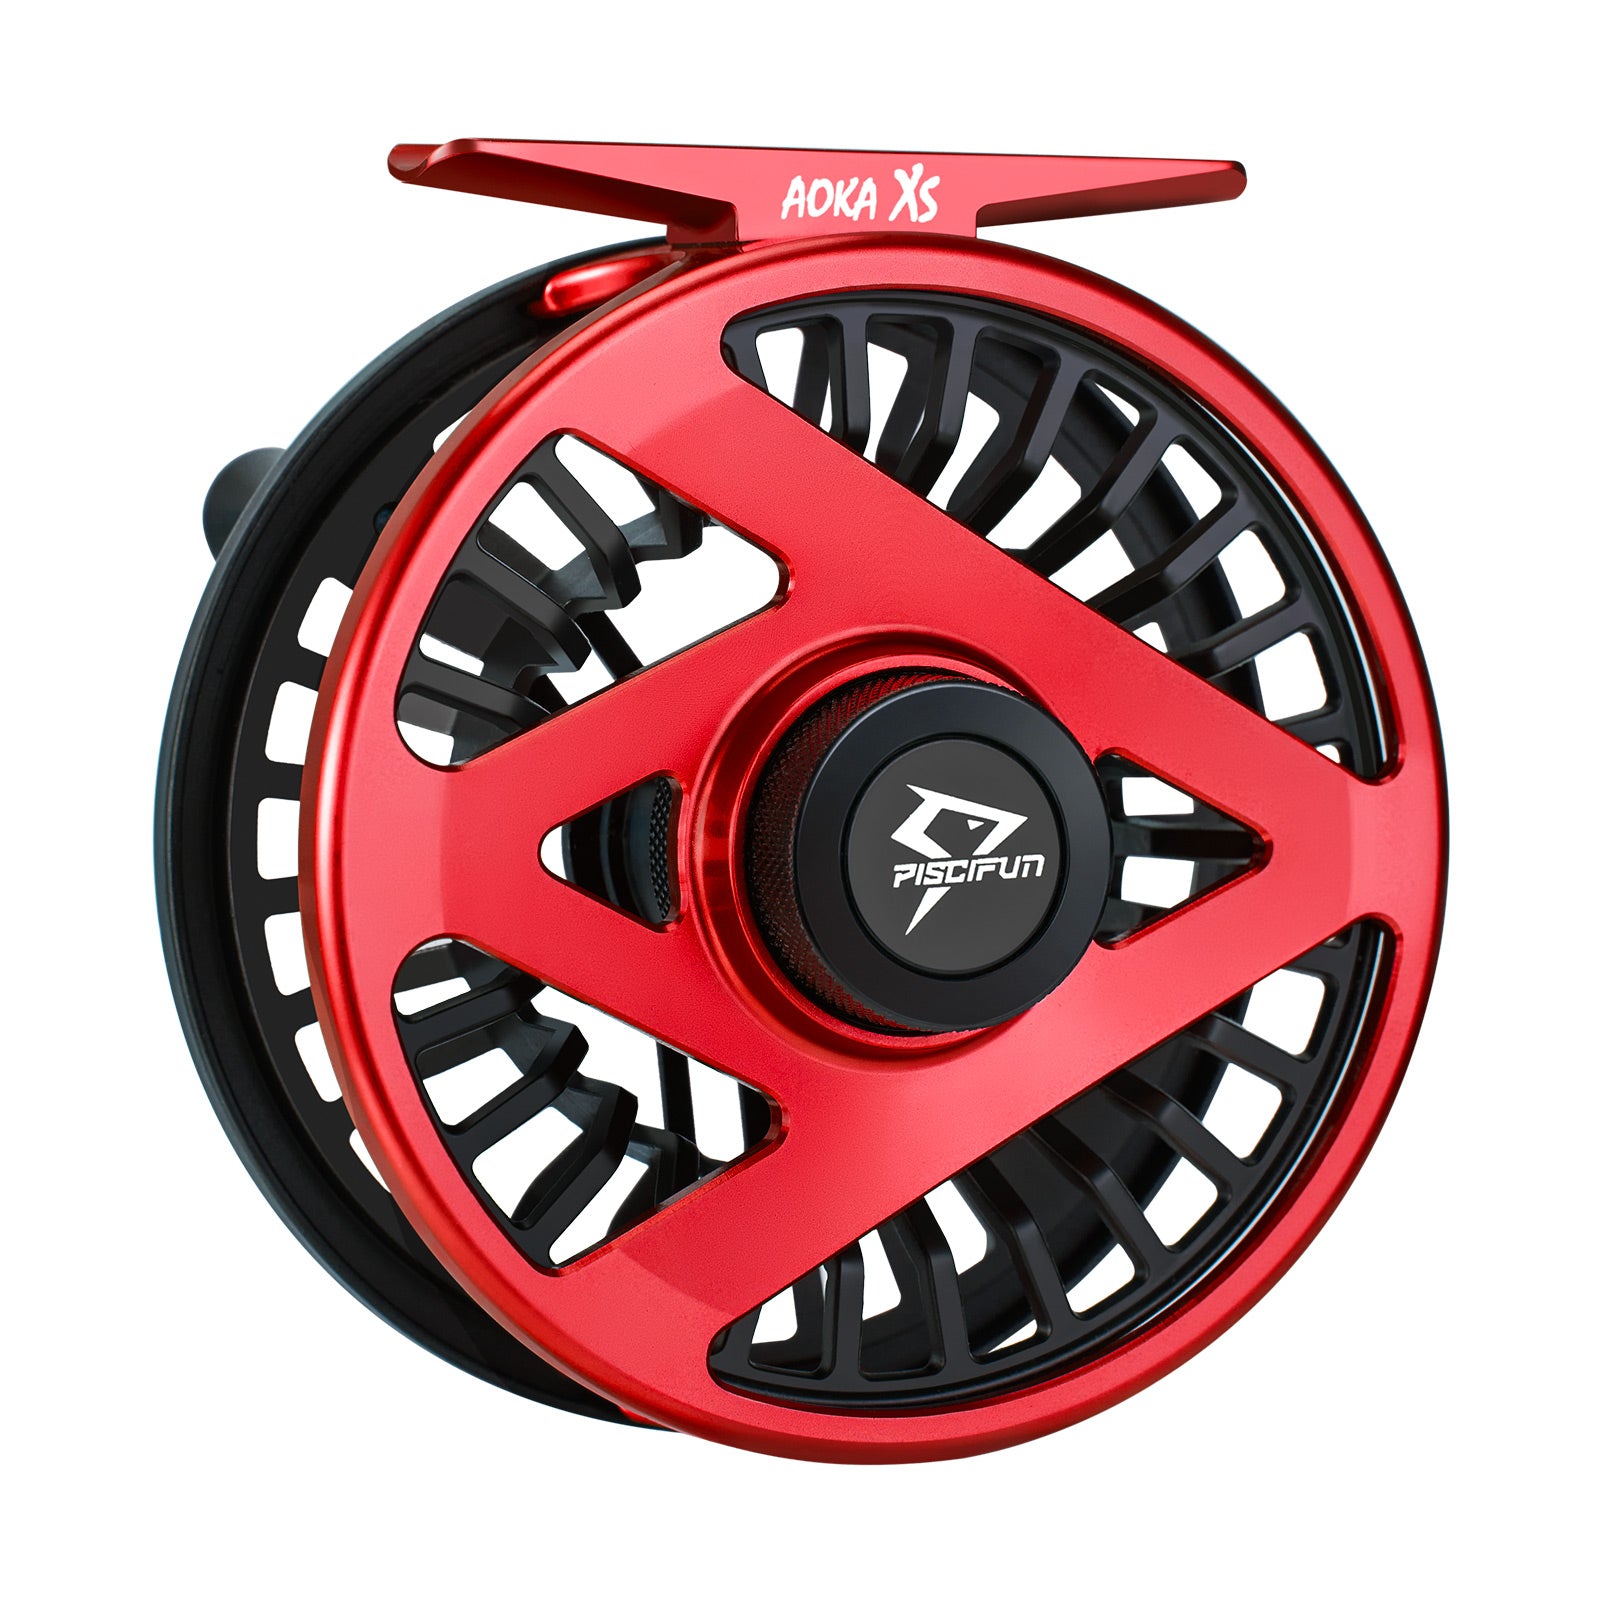 Piscifun® Aoka XS Fly Fishing Reel with Sealed Drag, CNC-machined Aluminum  Alloy Body Fly Reel, Black & Red / 5/6WT